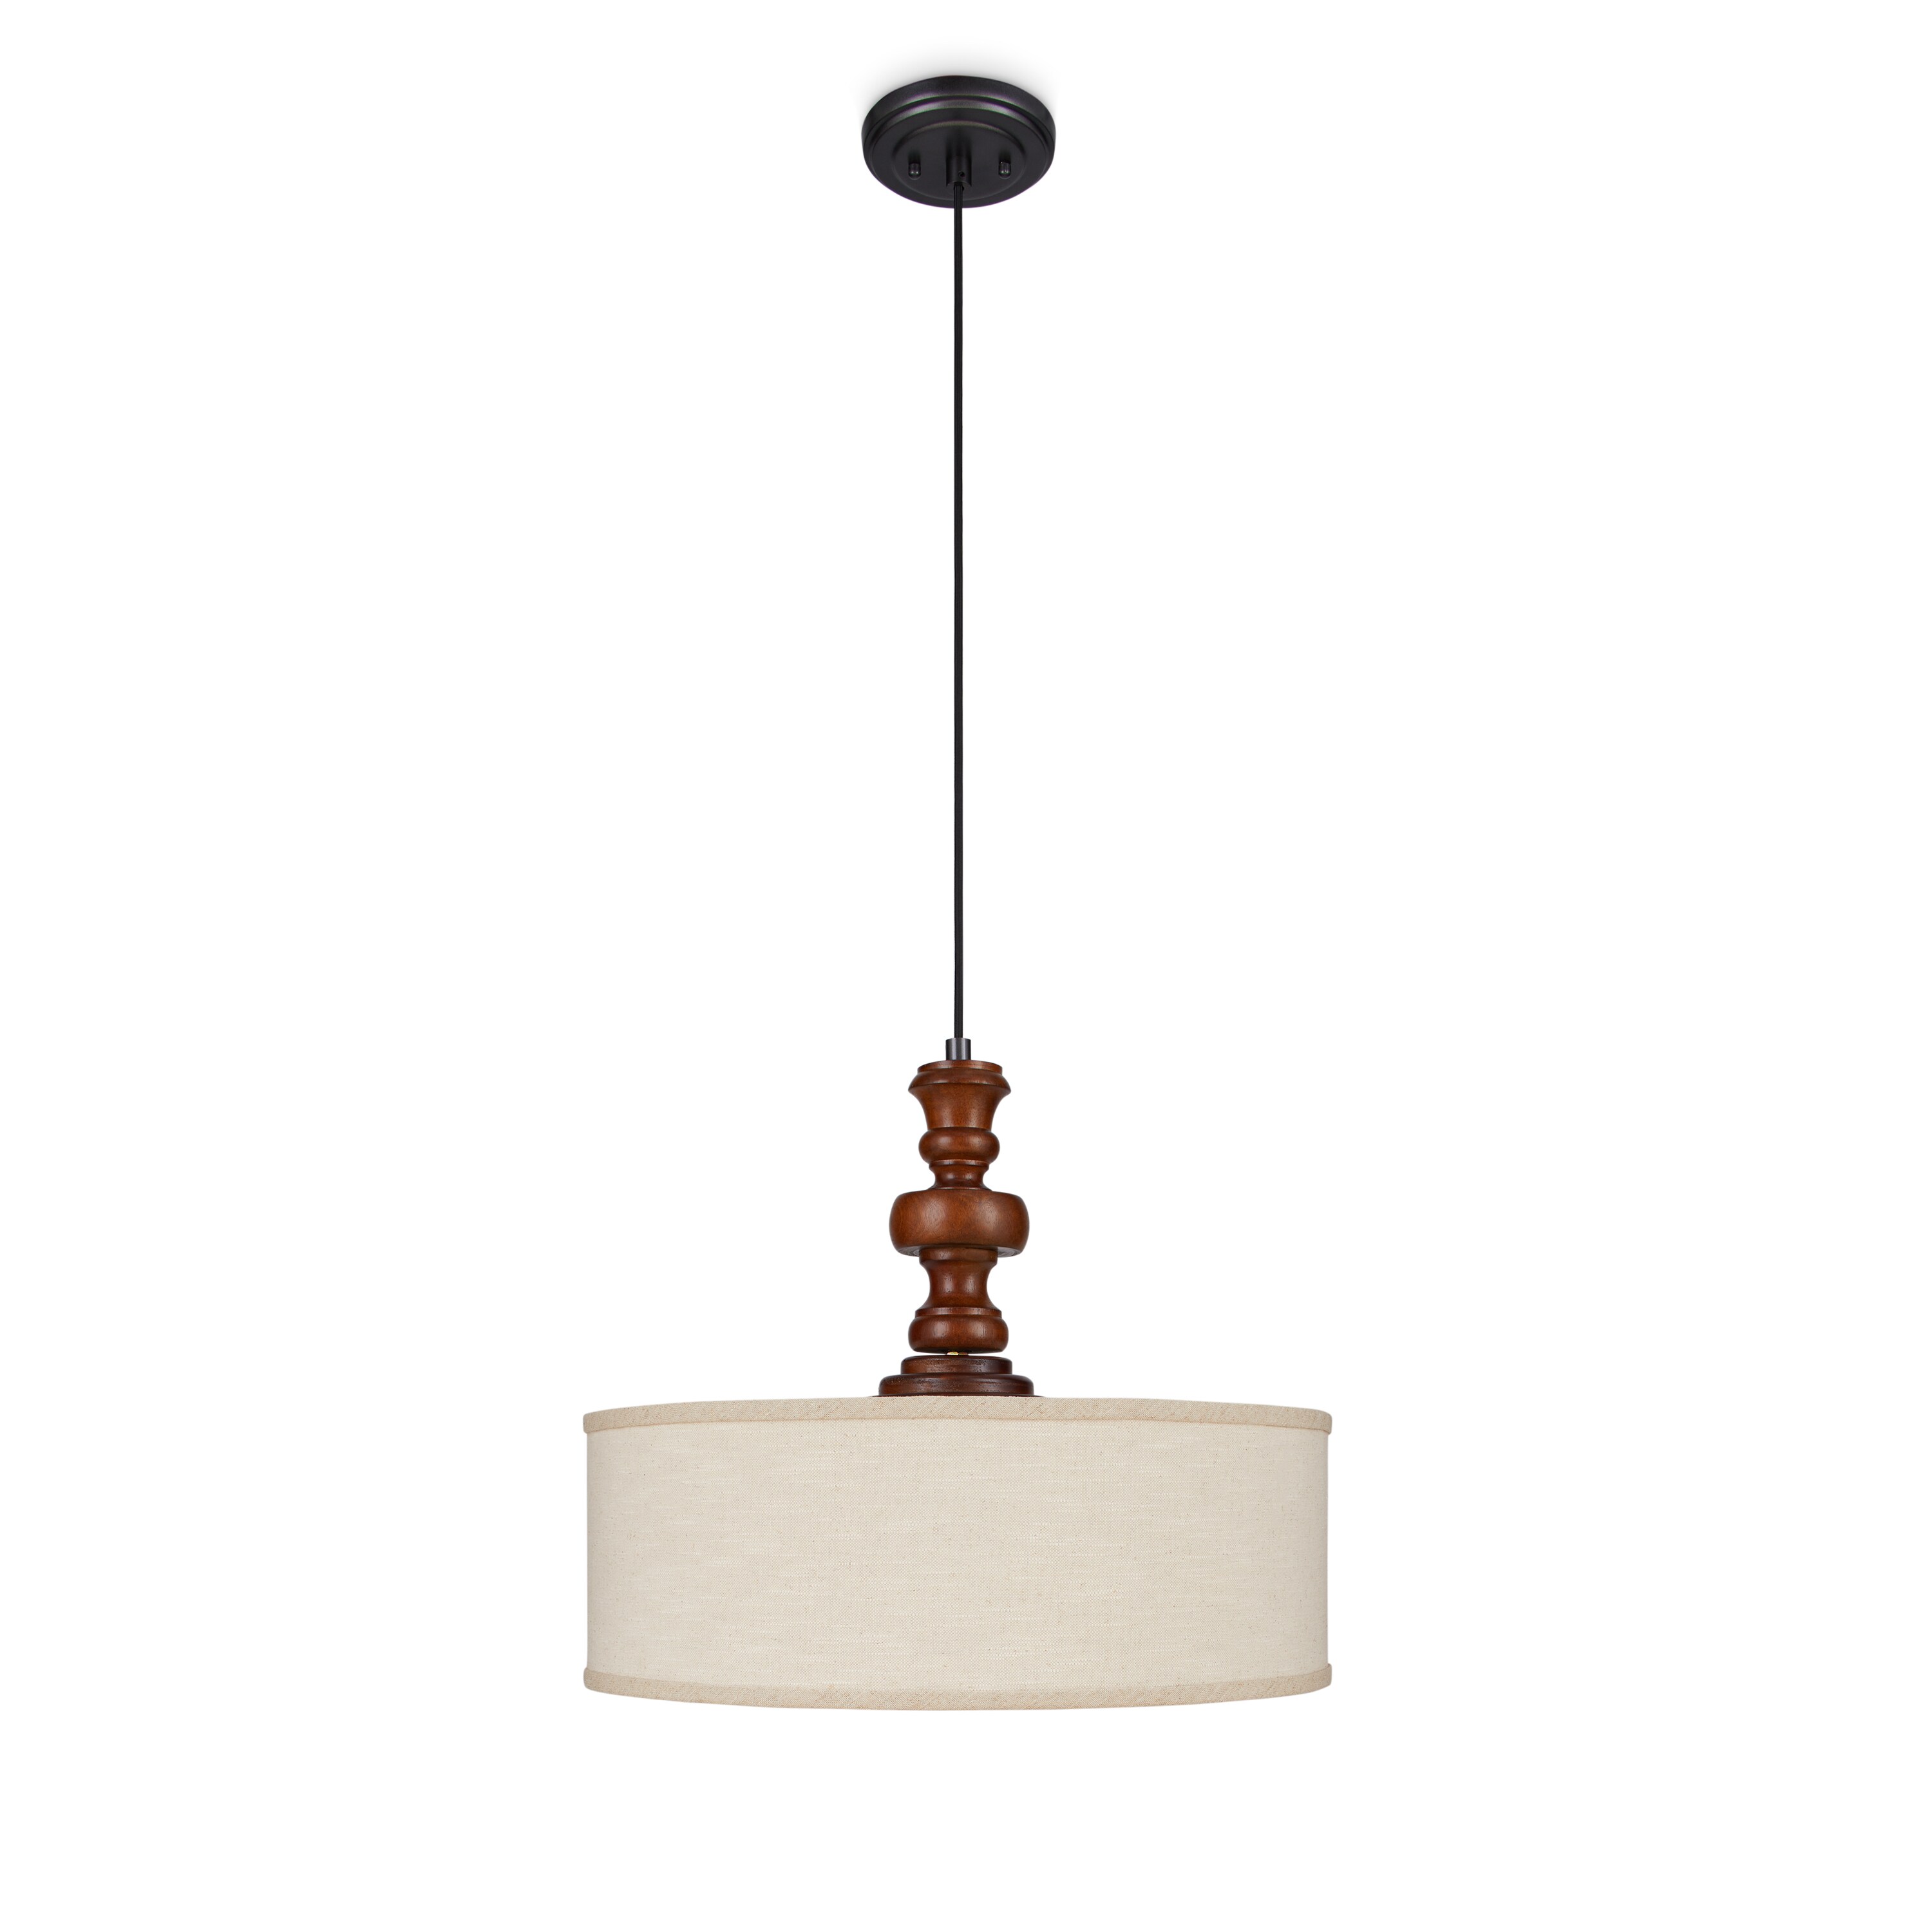 How to install pendant lights video by ellie kemper